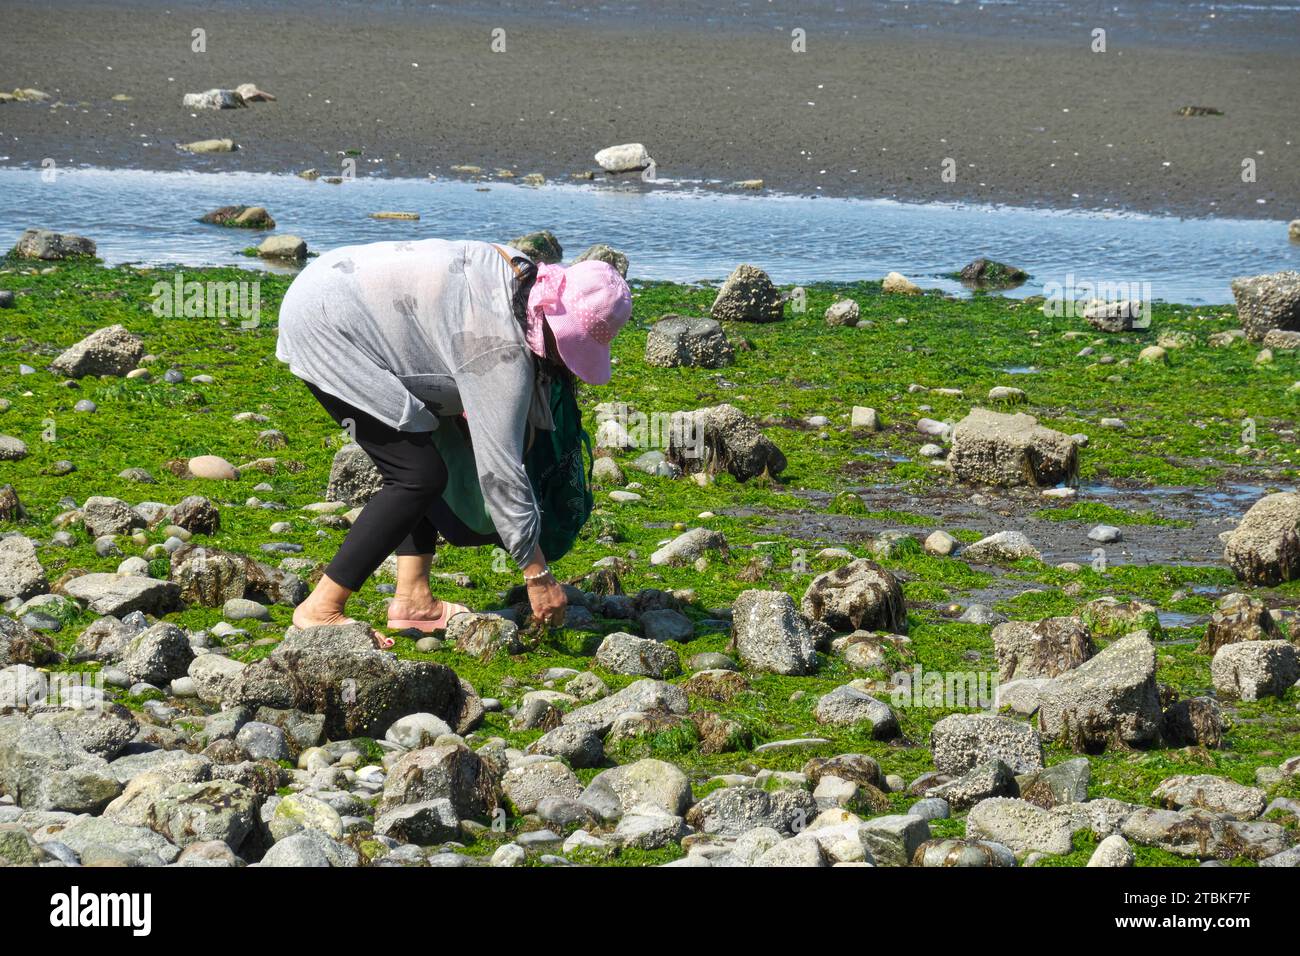 Woman in pink hat bending over on a rocky beach collecting seaweed or kelp. Crescent Beach, B. C., Canada. Stock Photo